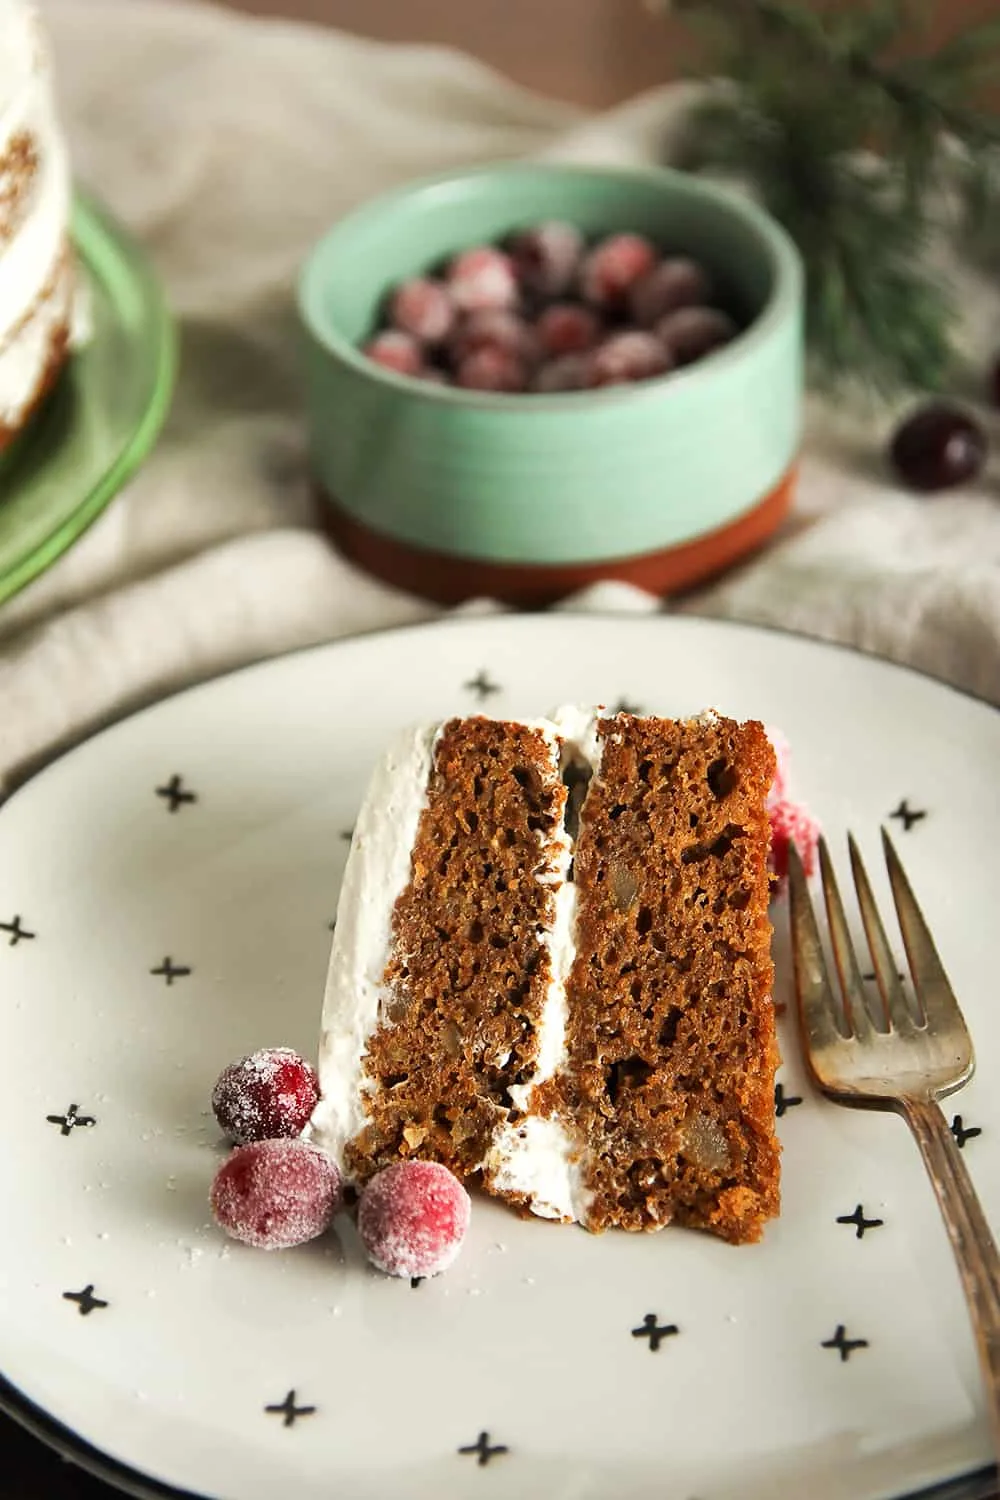 Gingerbread Layer Cake is a wonderfully festive dessert for your holiday parties